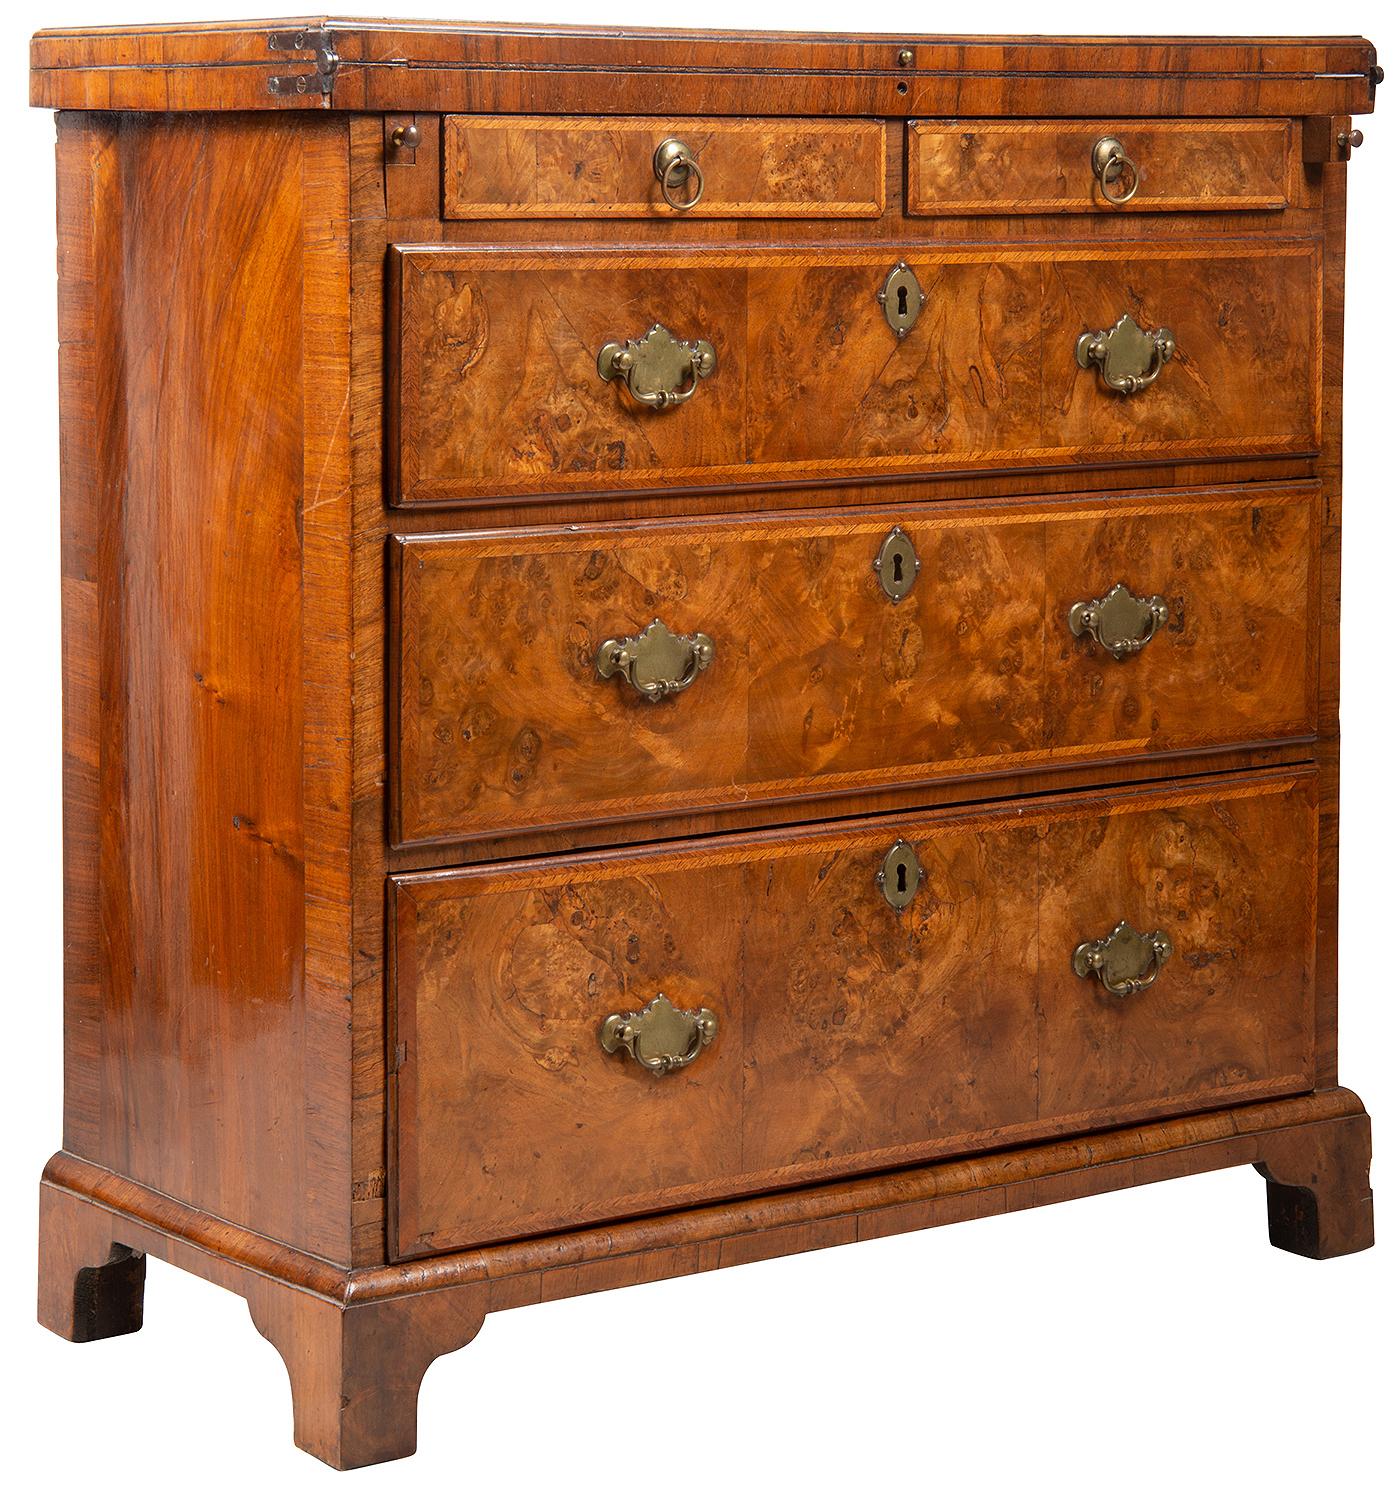 A superb George I figured walnut and feather banded fold over top bachelor chest. The rectangular top with fine figured veneers and crossbanded. Double drawers to the top, a barer either side to support the hinged top which has an inset leather top.